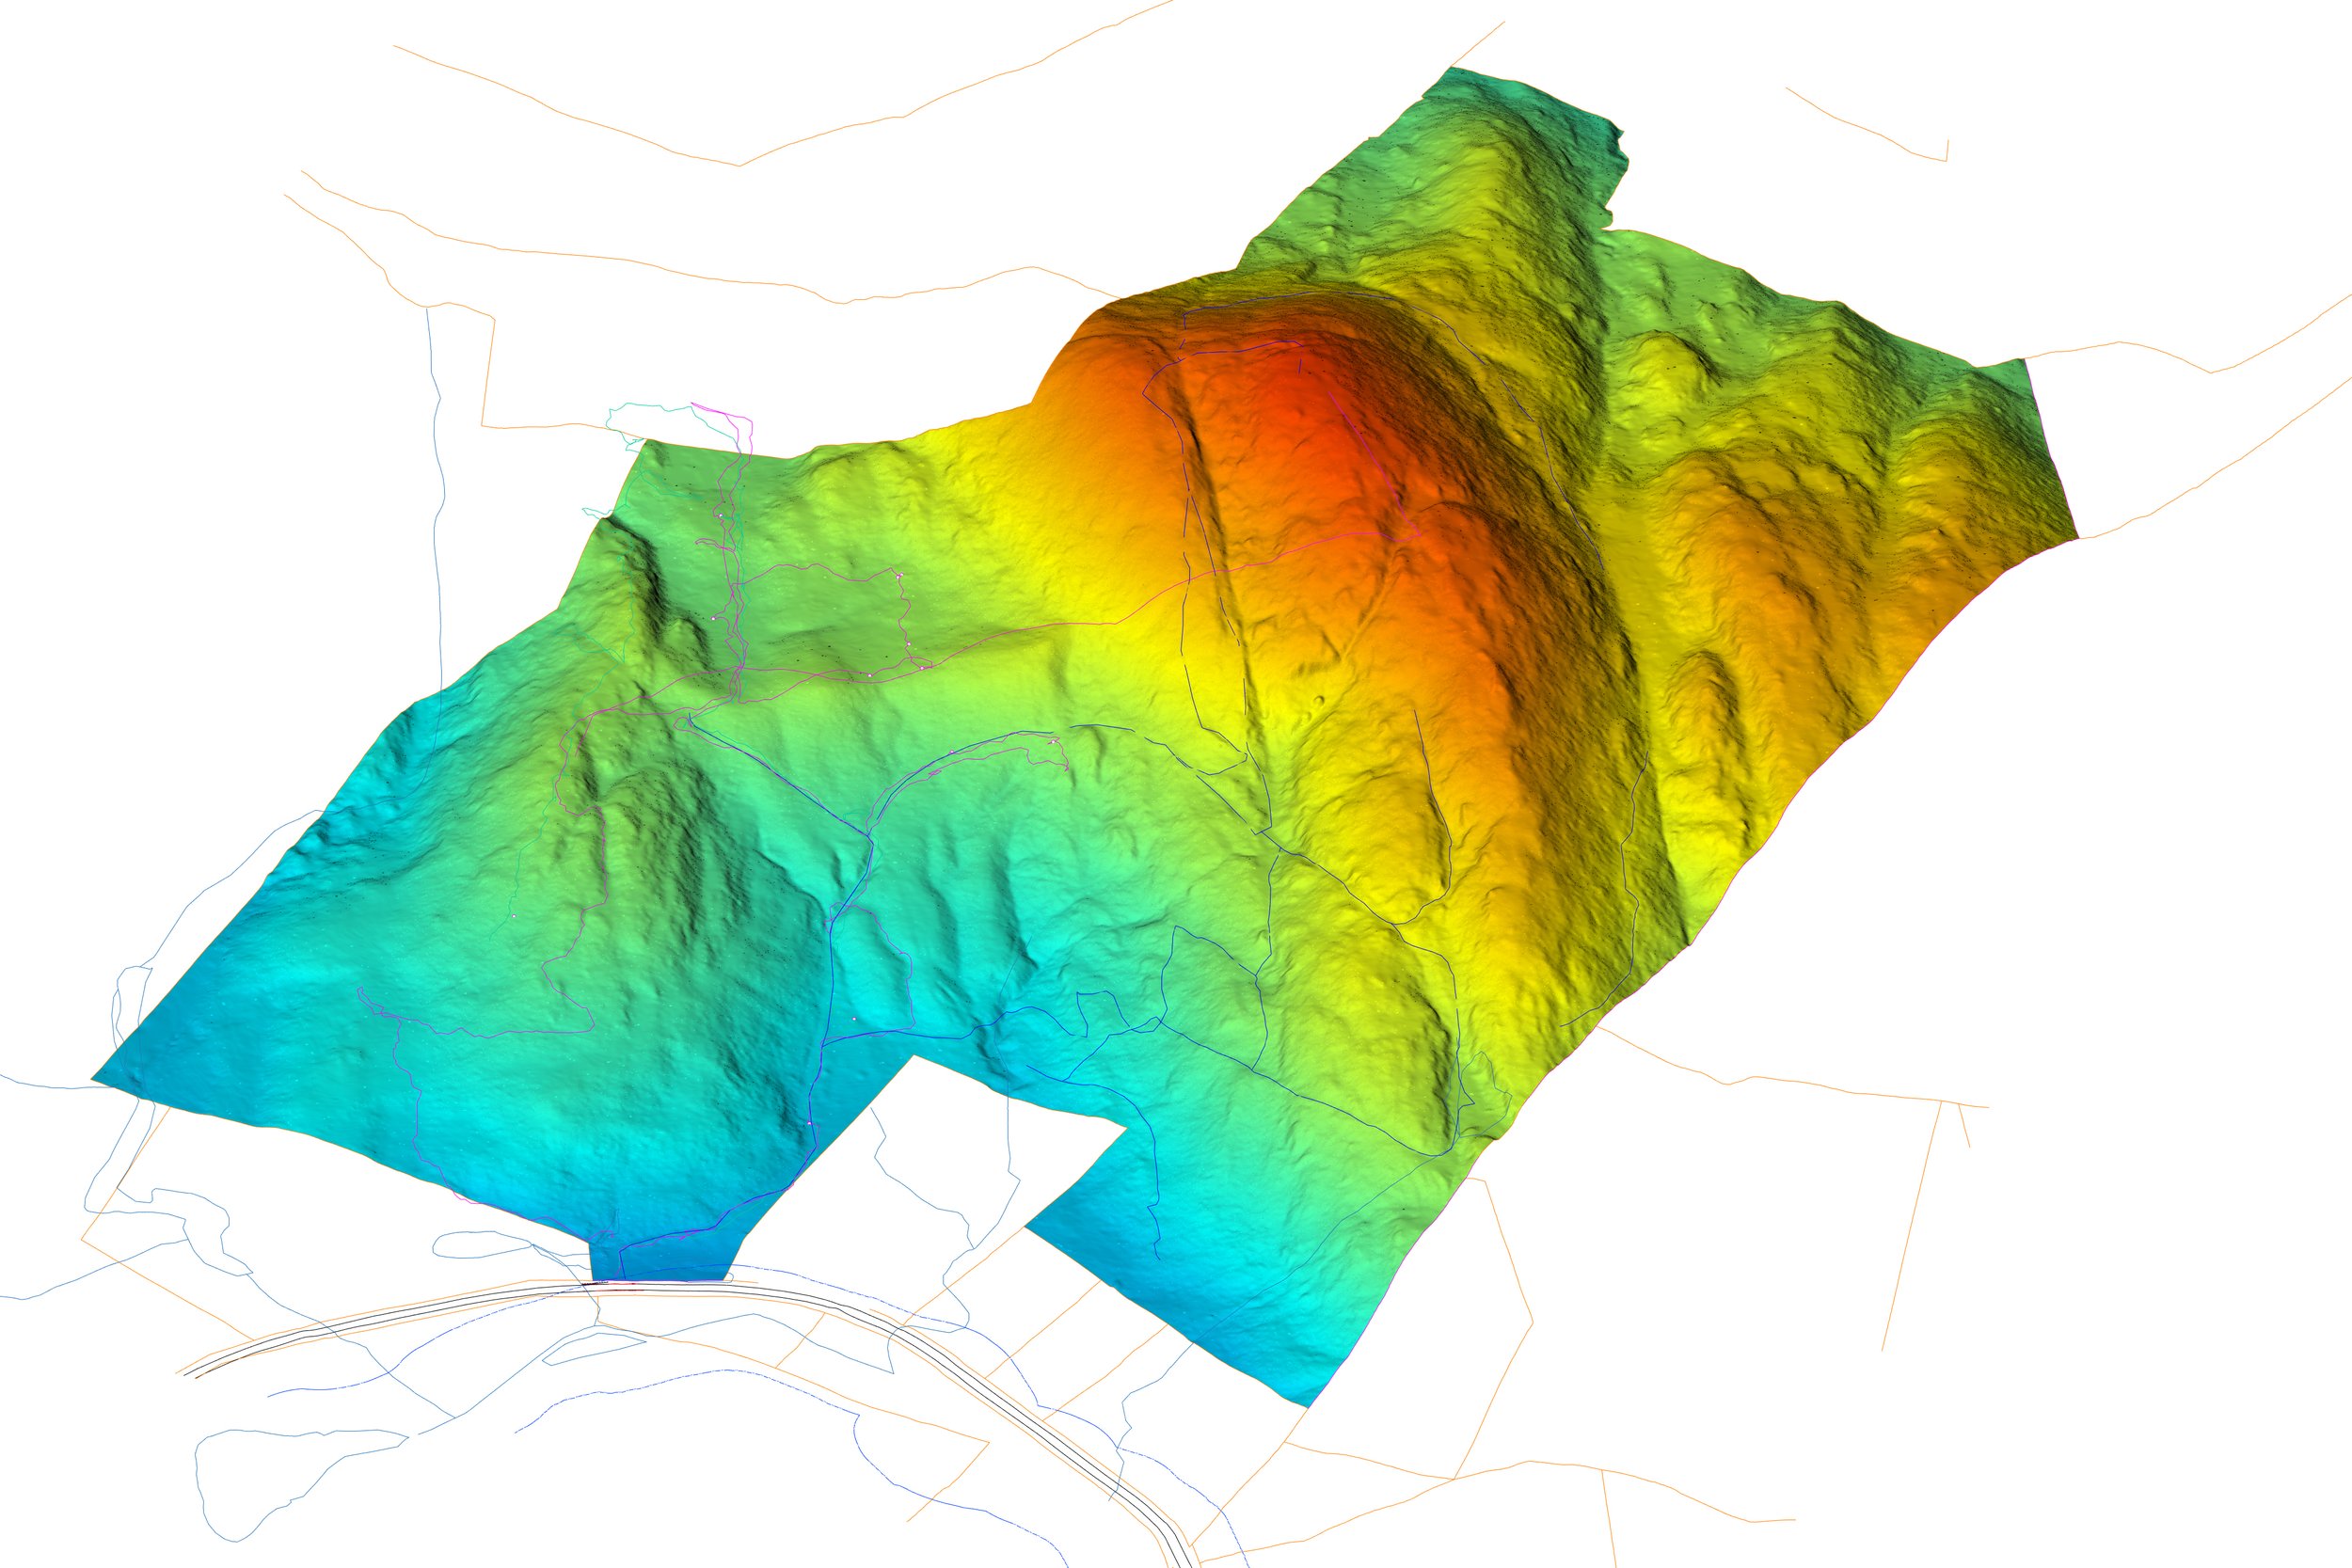 3D Image of Terrain and Trails